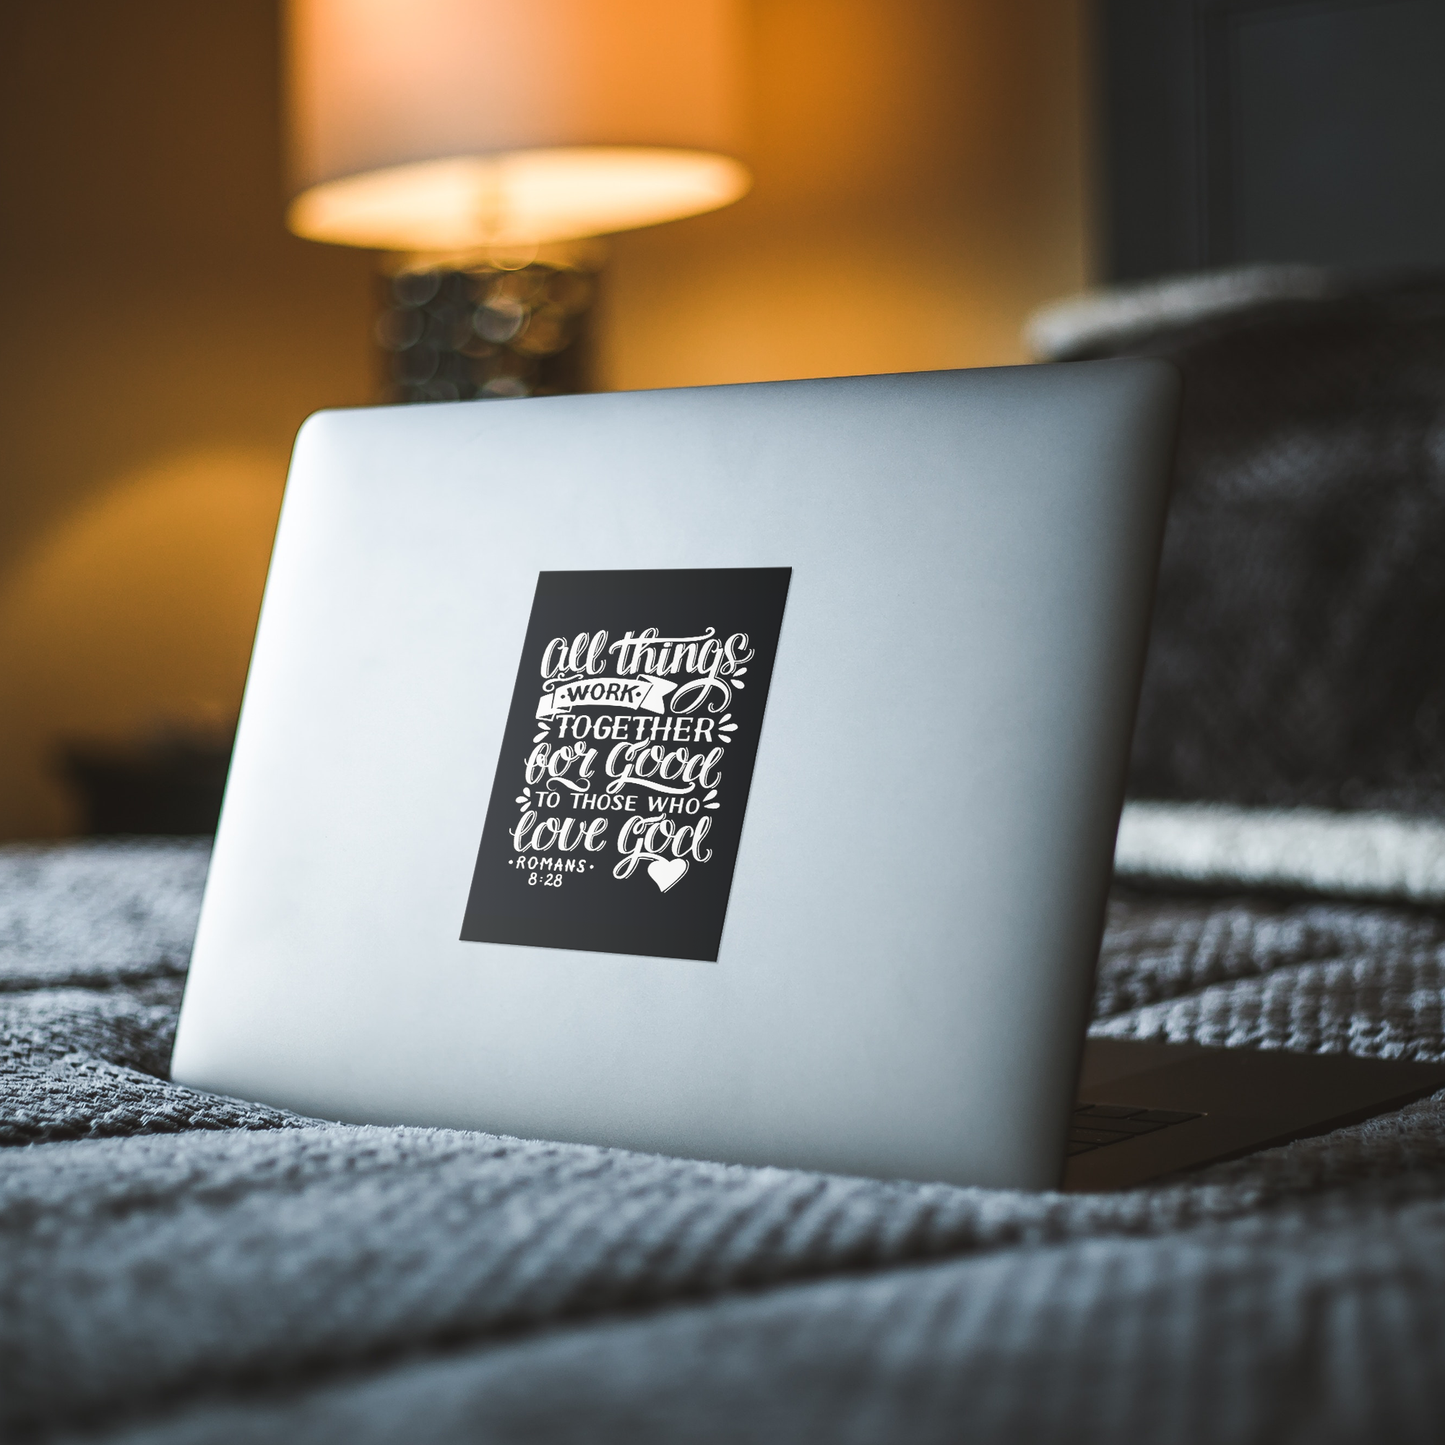 All Things Work Together For Good To Those Who Love God, Romans 8:28 - White on Black Rectangle Sticker on a laptop